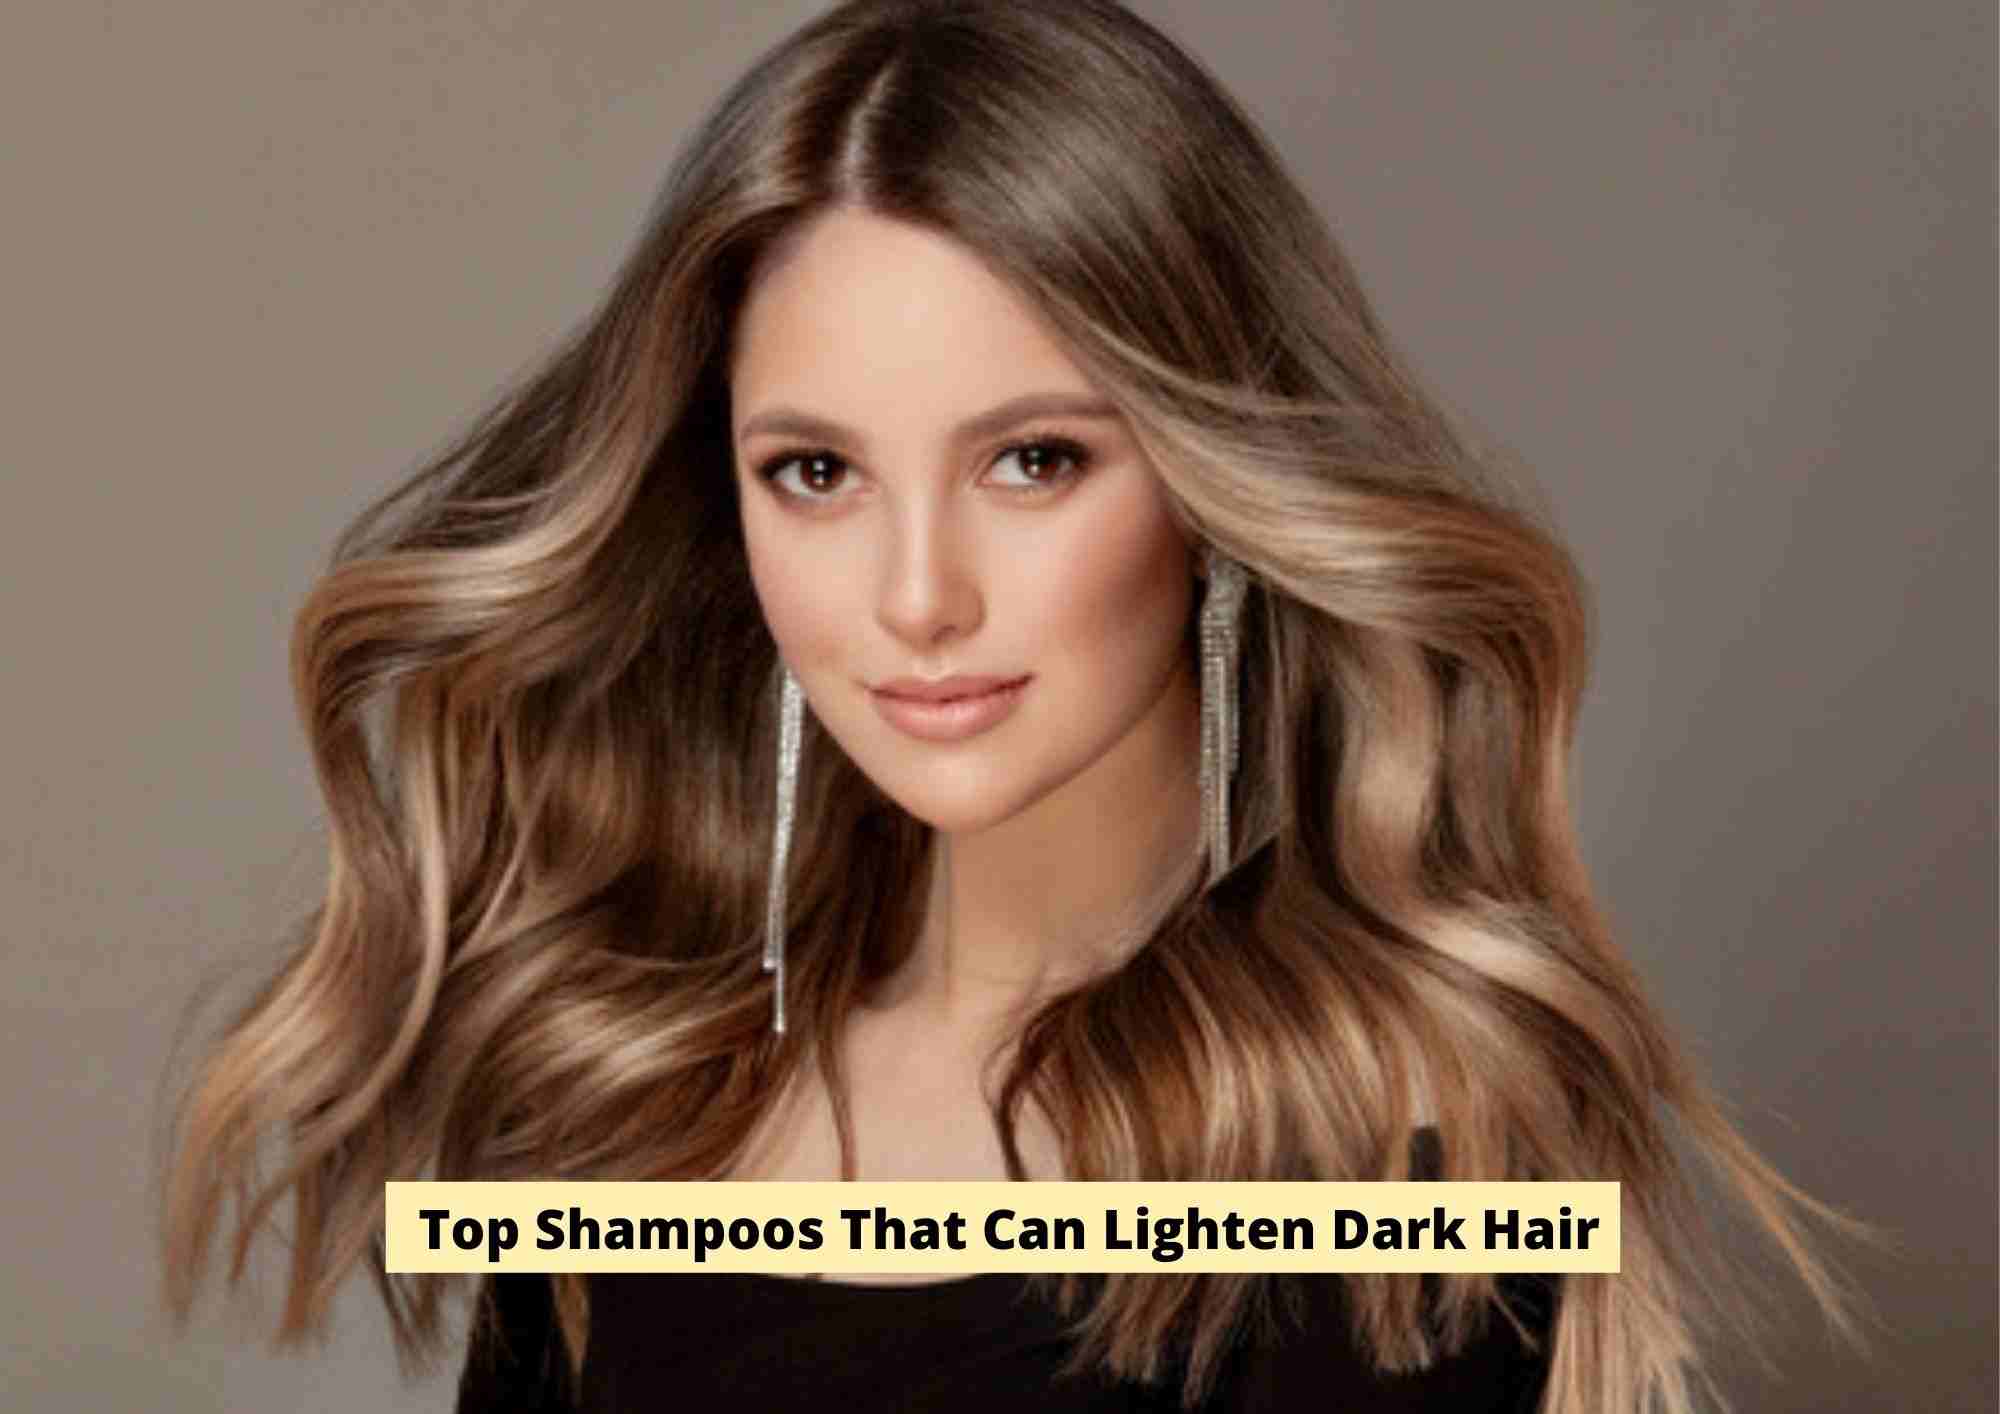 Try These Shampoos To Lighten Dark Hair Easily 2023 - Hair Everyday Review